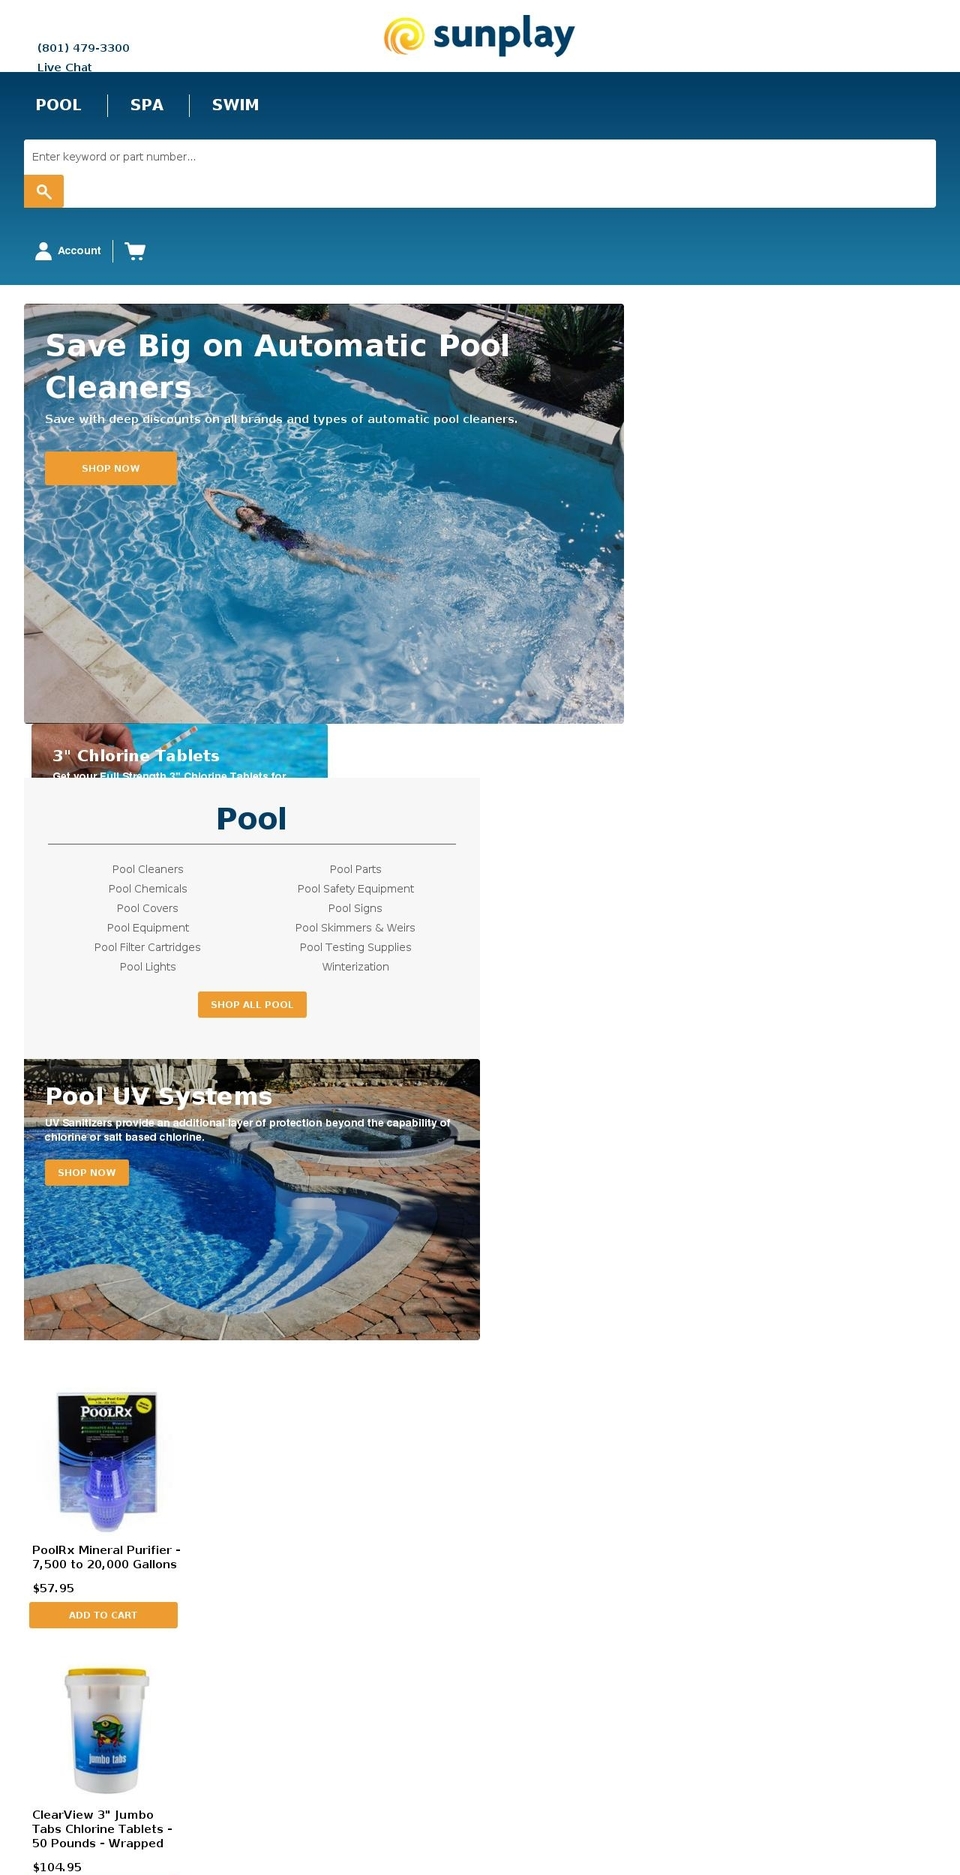 Sunplay v1.0 [Speck - Collection] Shopify theme site example sunplayonline.com